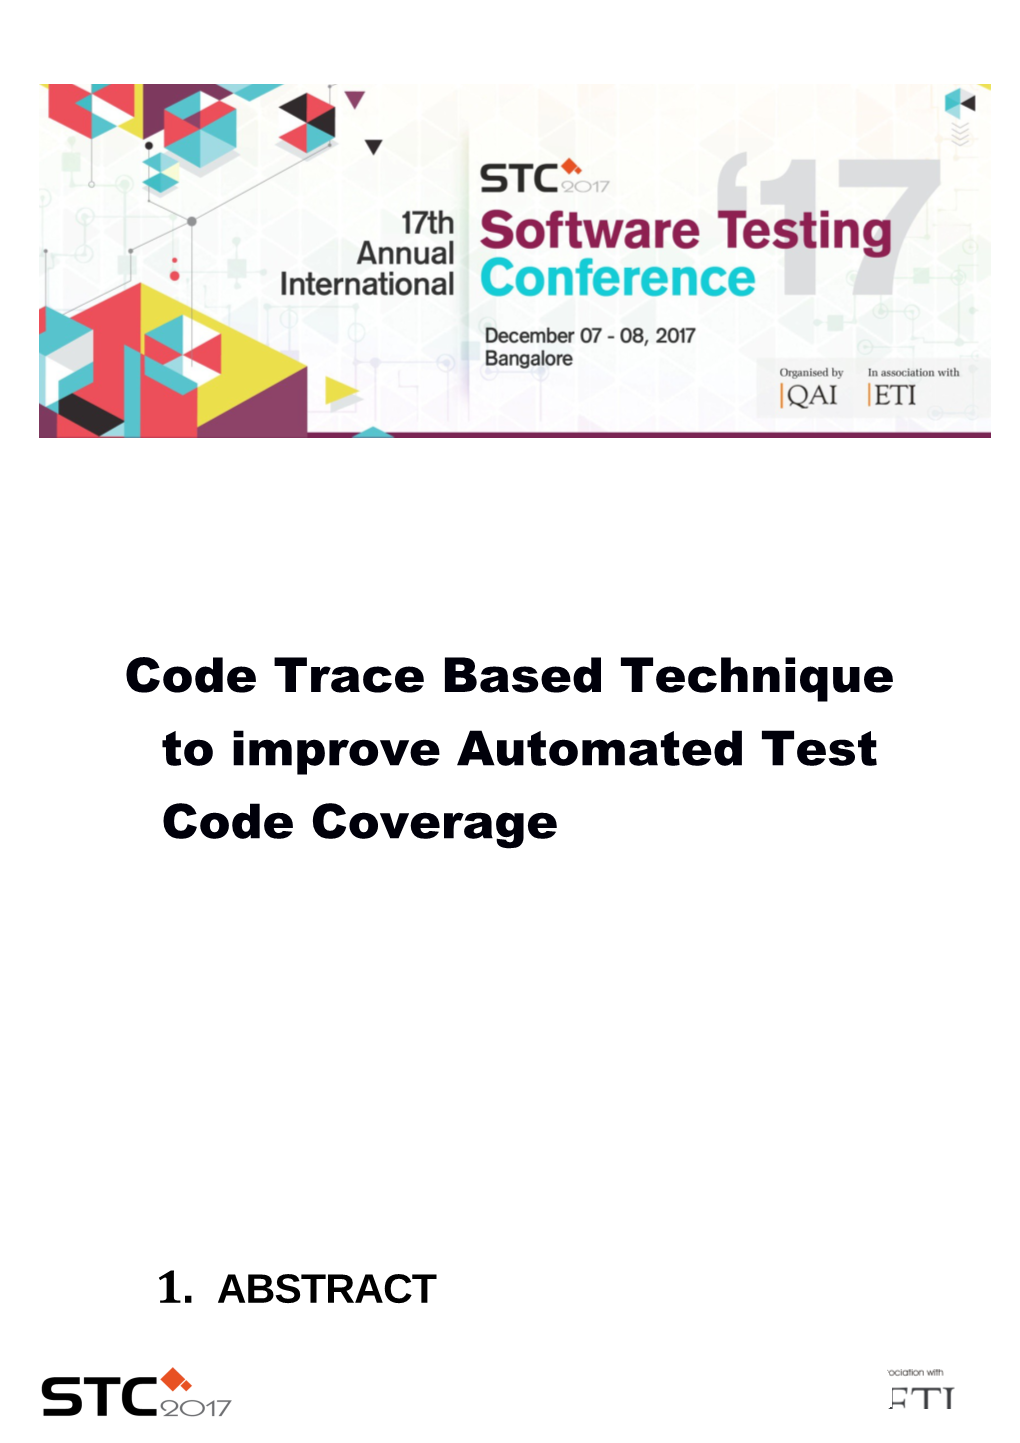 Code Trace Based Technique to Improve Automated Test Code Coverage